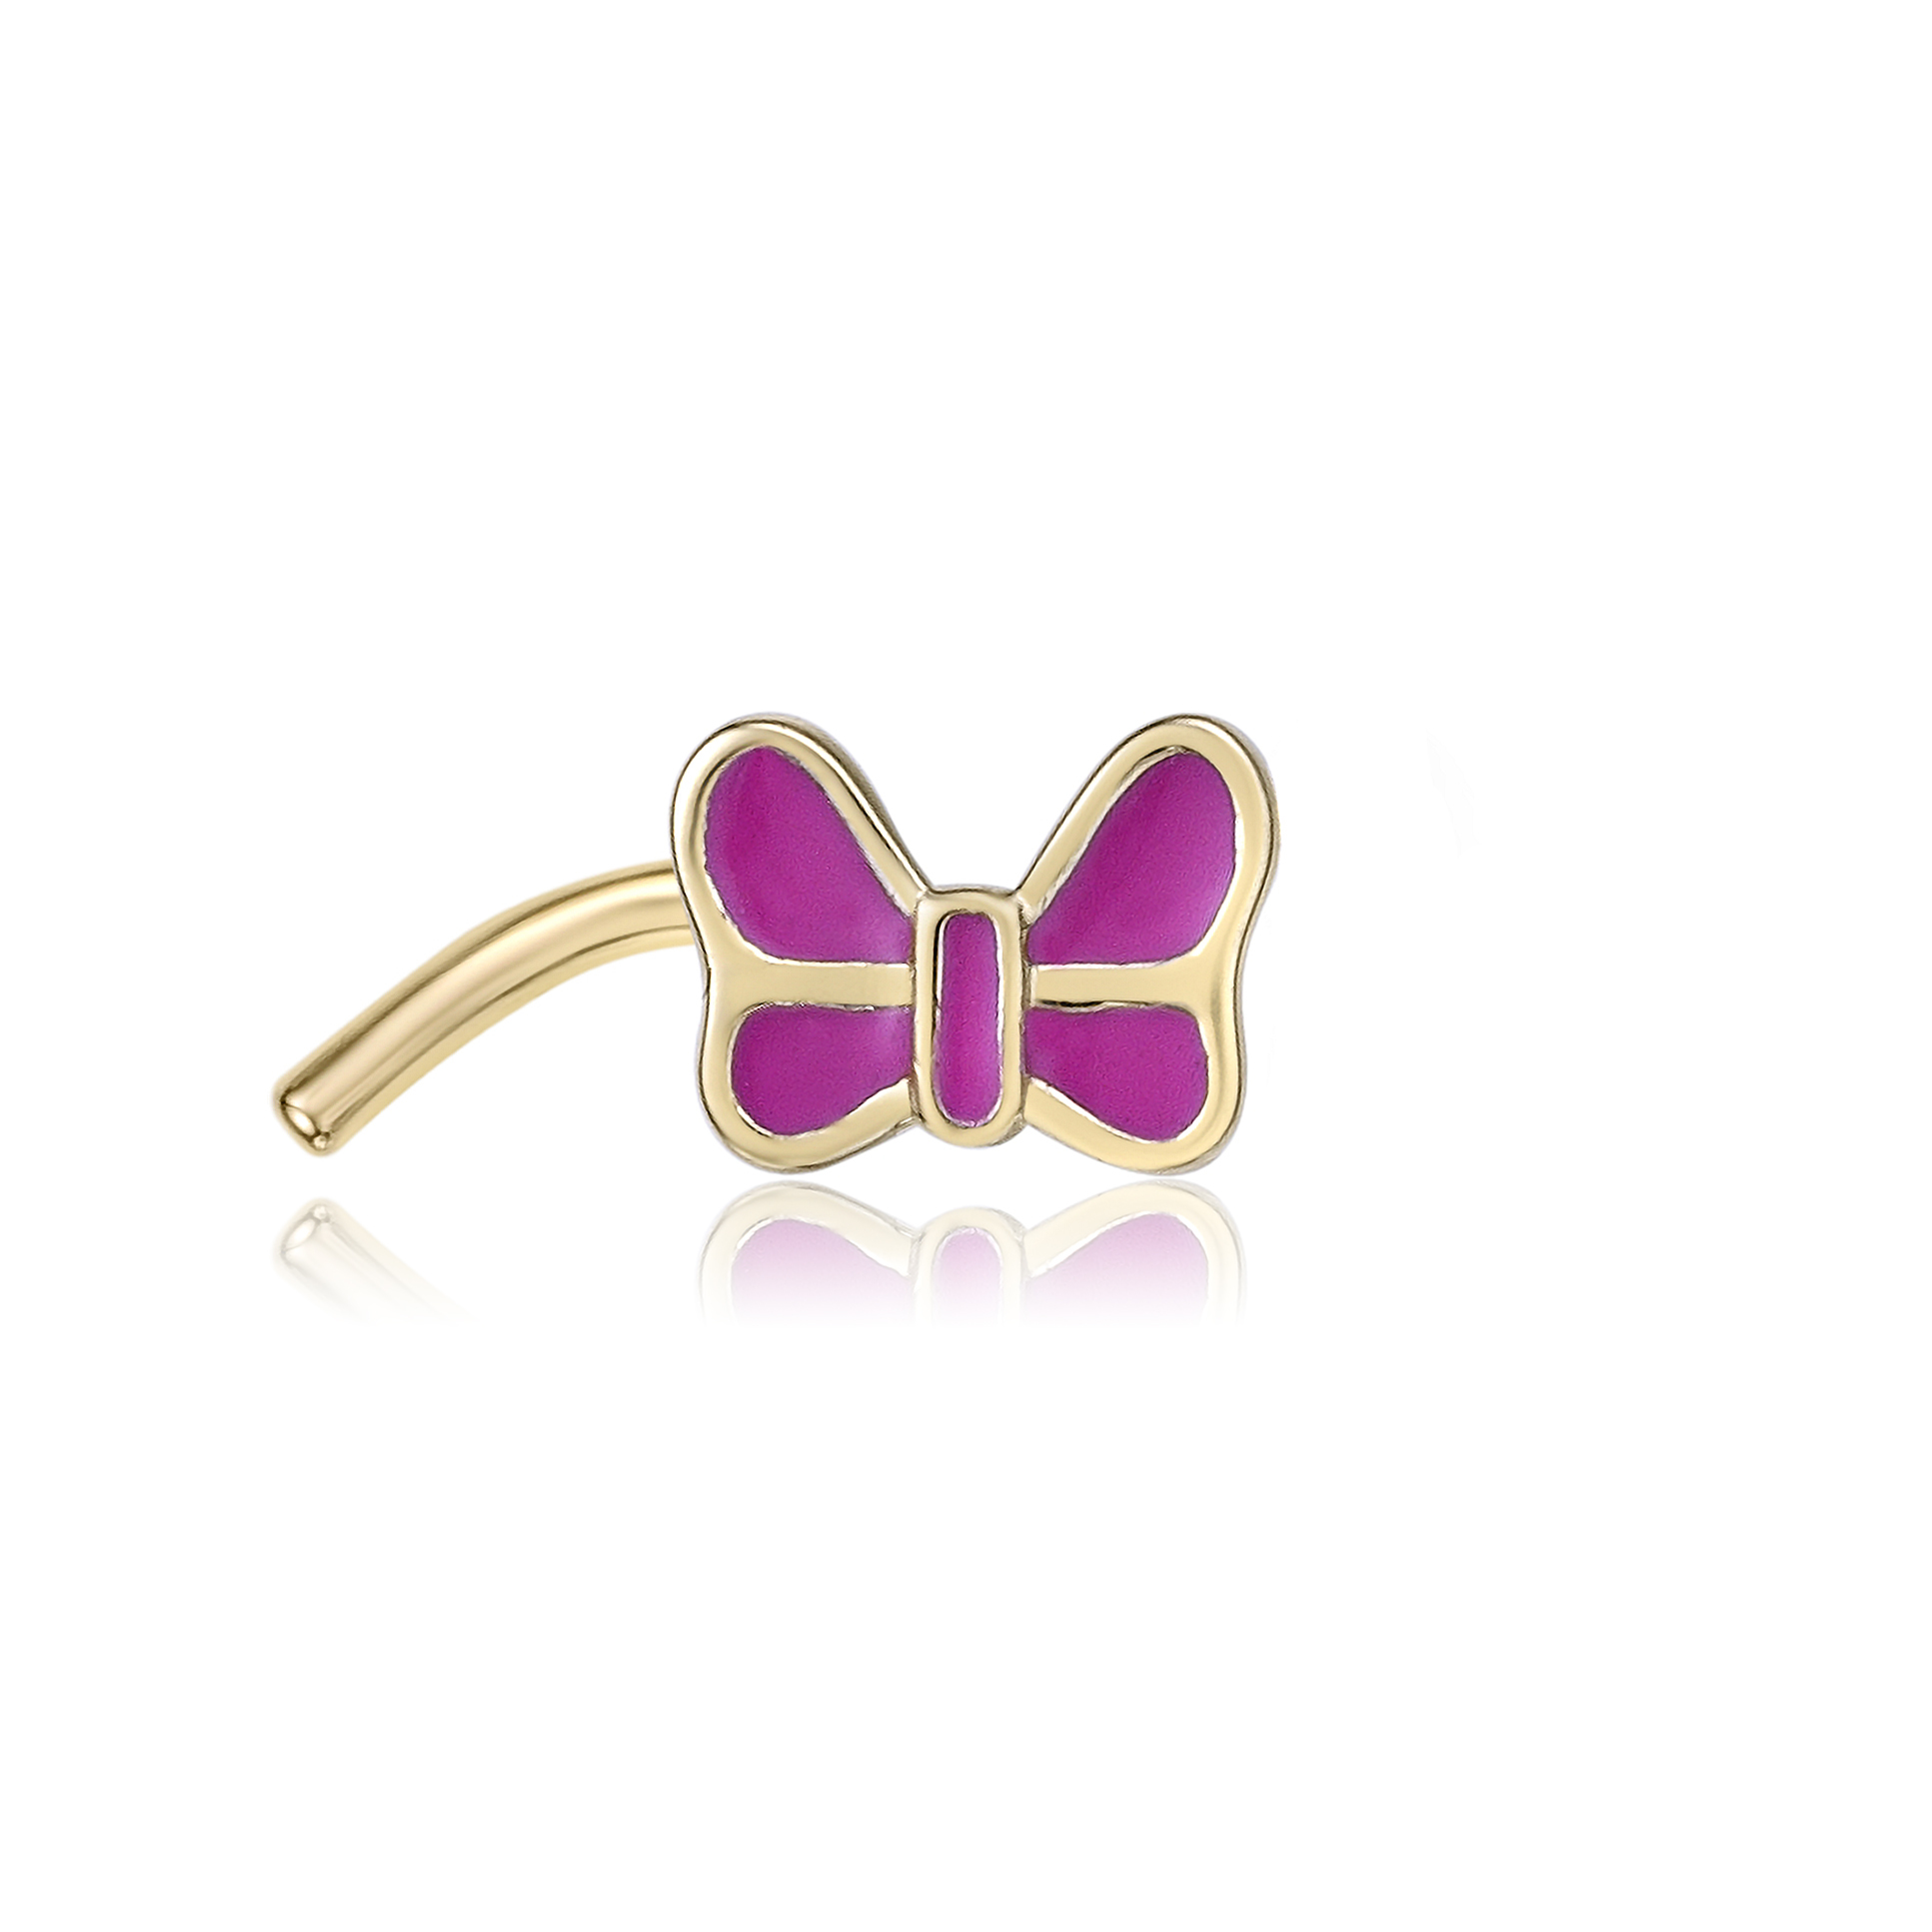 Lavari Jewelers Women's 5.5 MM Pink Enamel Butterfly Curved Nose Ring, 14K Yellow Gold, 20 Gauge